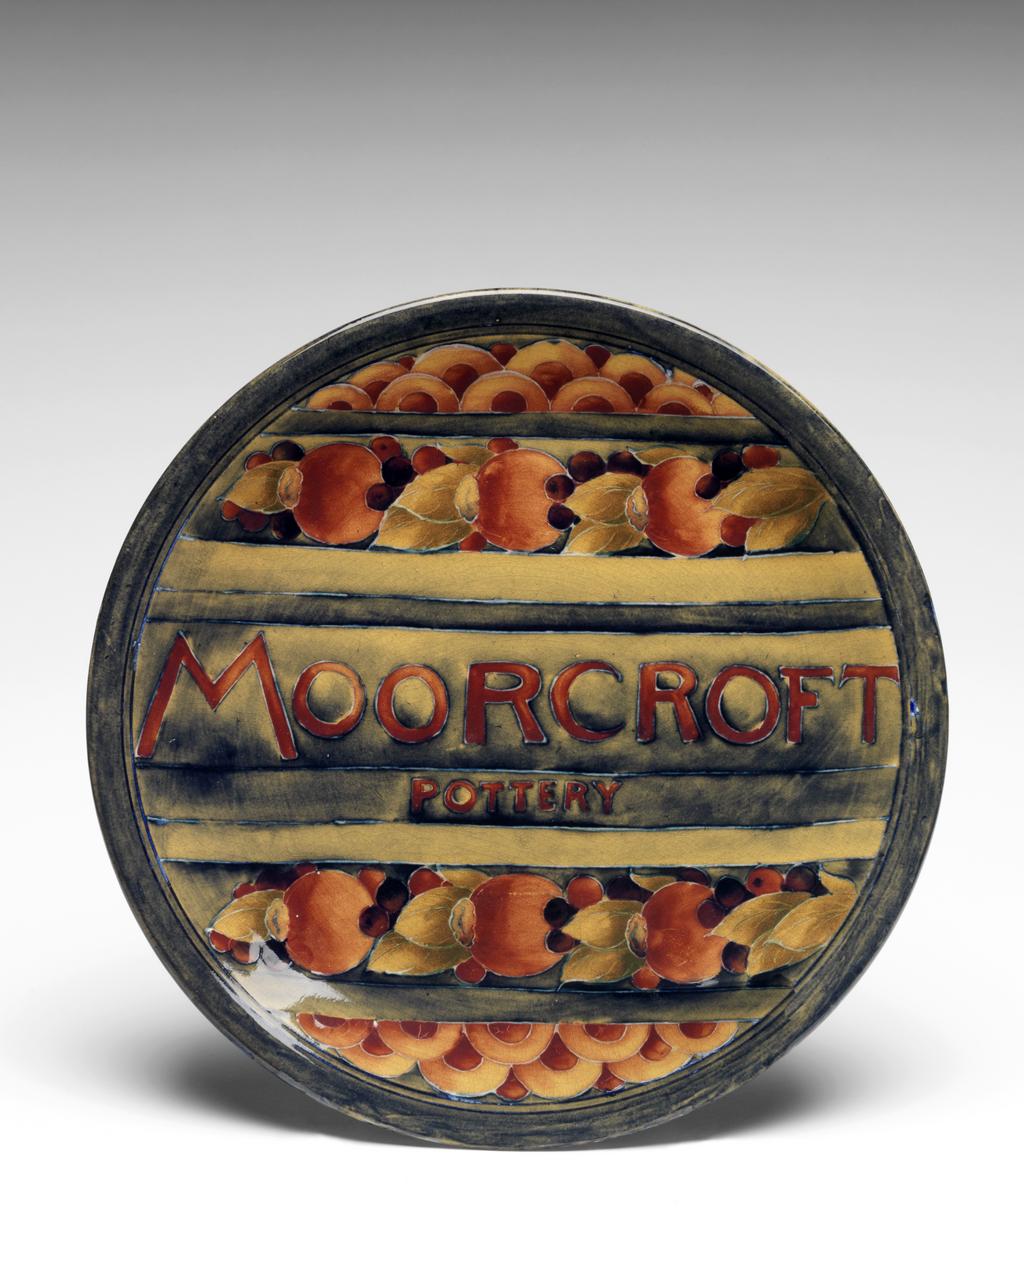 An image of Exhibition Plate. Moorcroft, William (British, 1872-1945). Moorcroft Pottery, Staffordshire, Cobridge. The front is decorated with the words ‘MOORCROFT/POTTERY’ between horizontal bands of pomegranates, berries and leaves, and scale pattern. Cream earthenware plate with slip trailed design, painted underglaze in dull shades of ochre, red, dark red, and blue-black, with 'Pomegranate' pattern, press-moulded, height 3 cm, diameter 26 cm, circa 1913-circa 1920 (probably c.1916). Art Pottery.